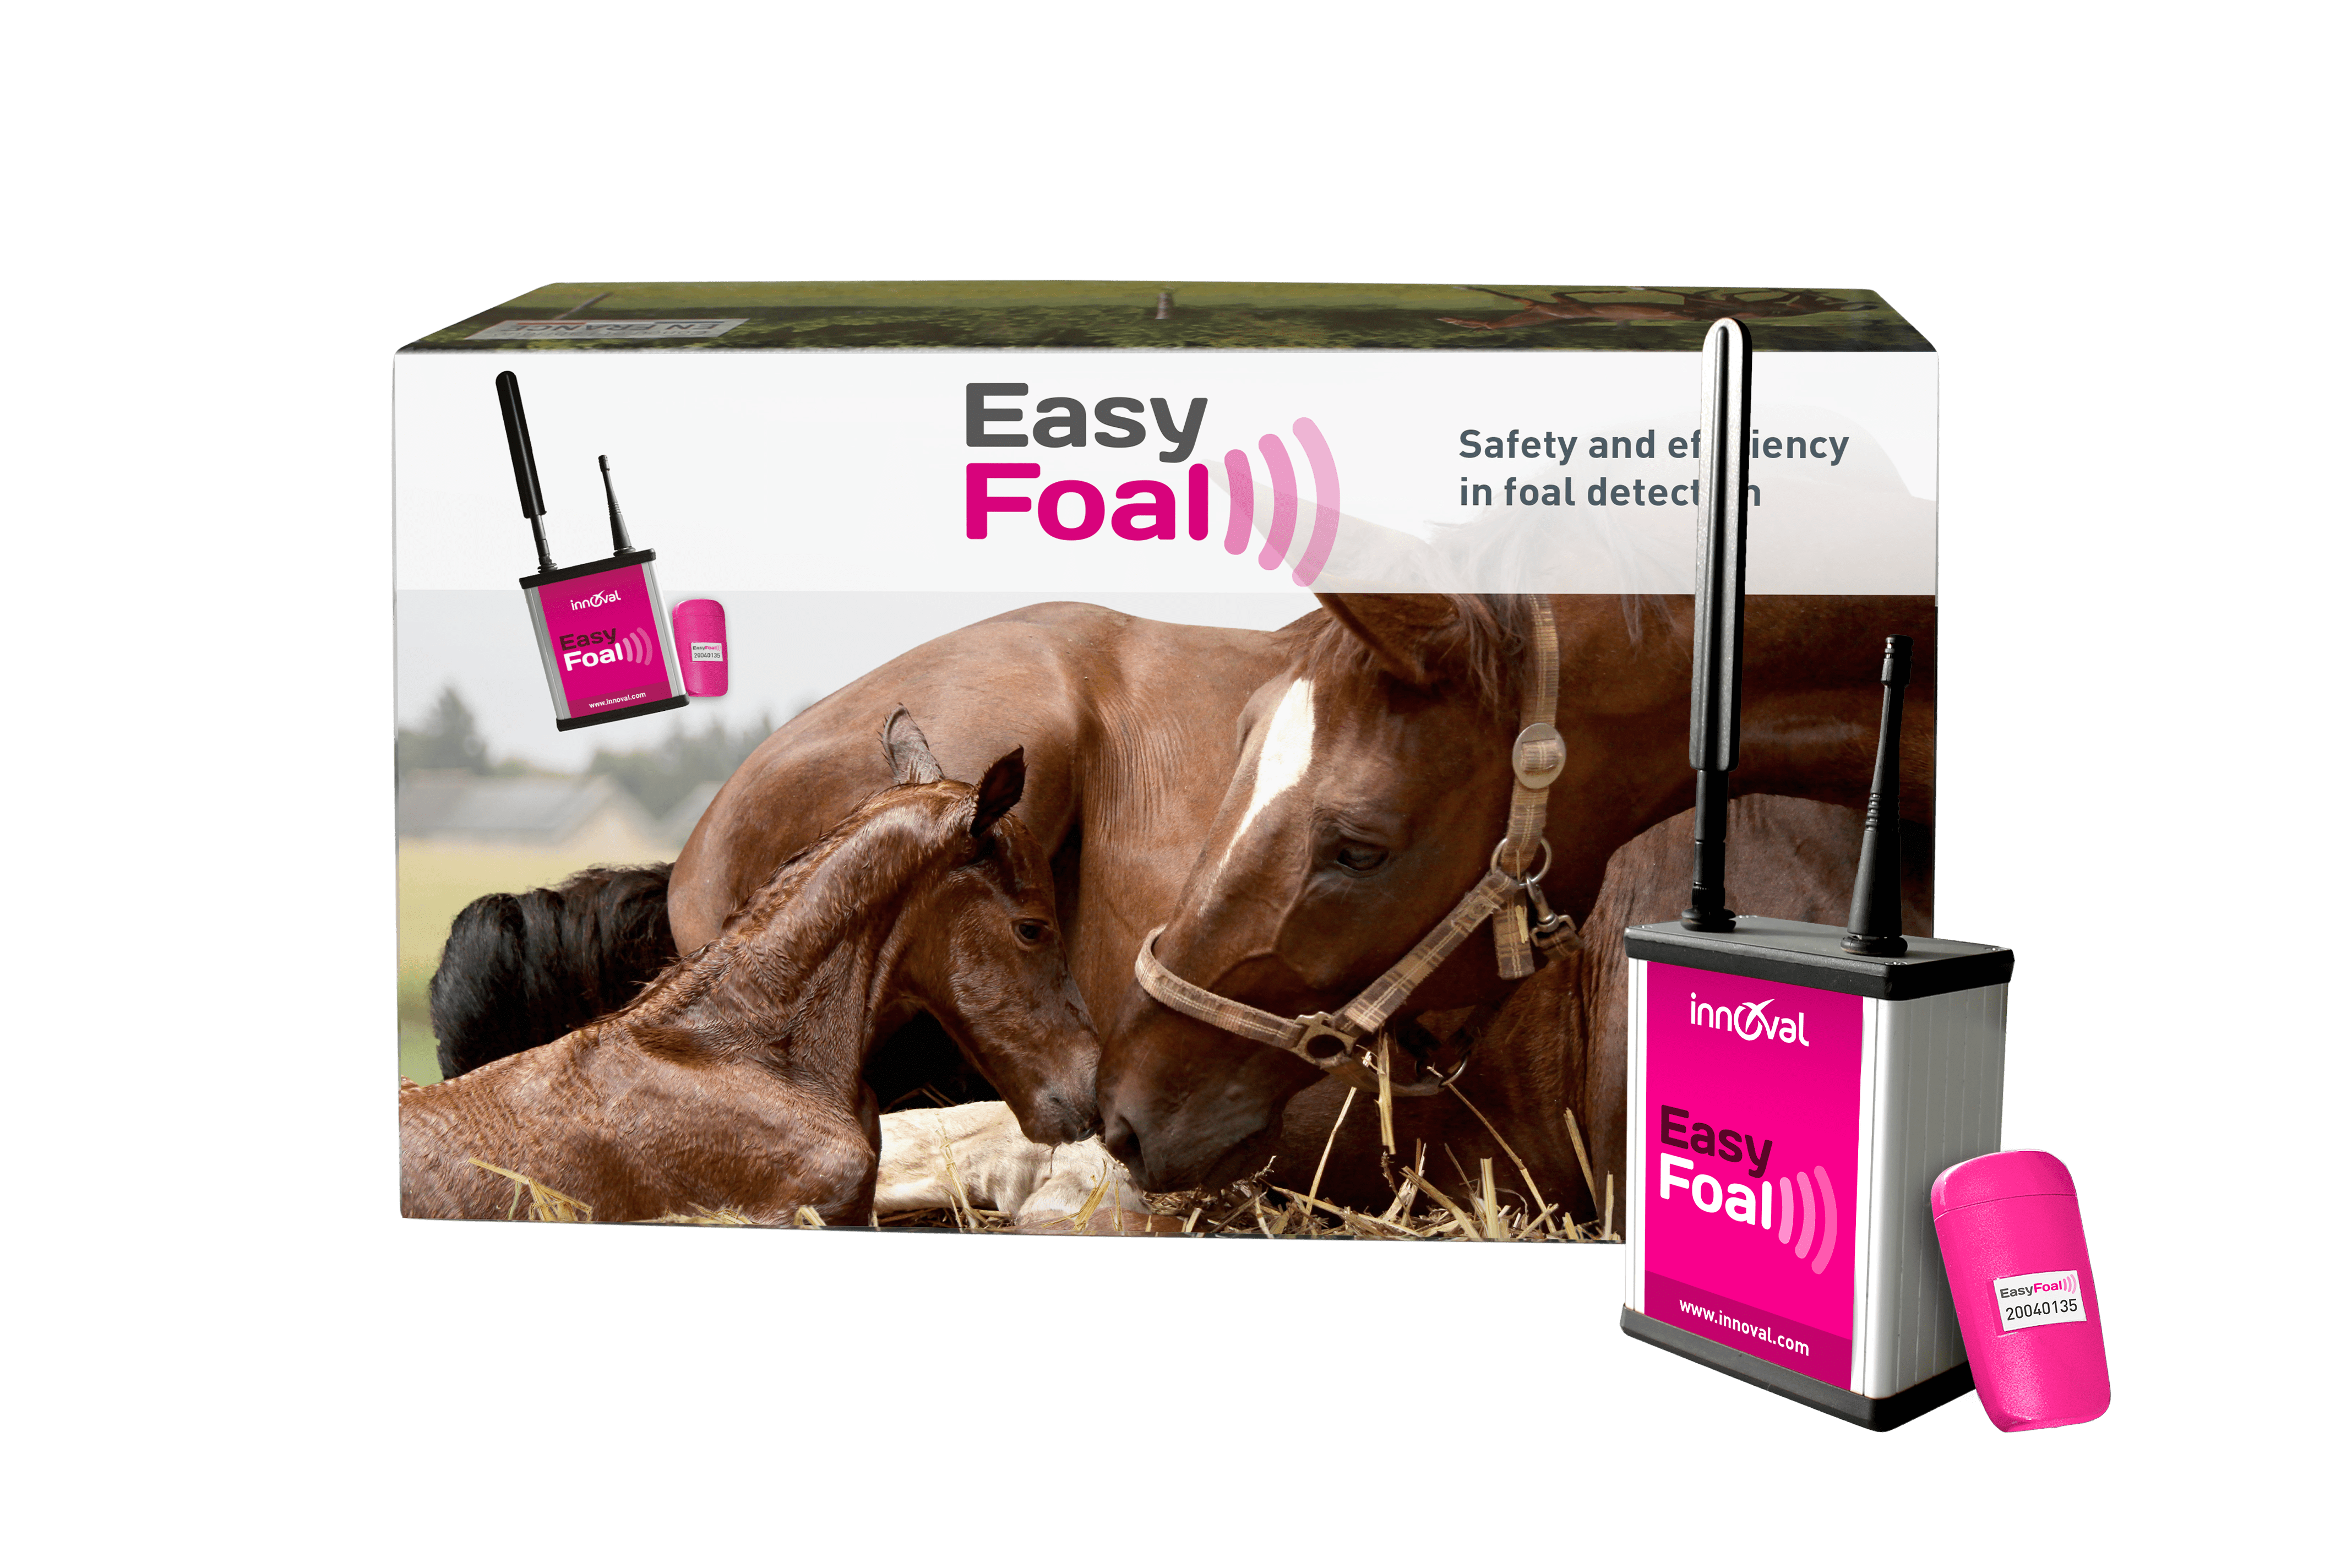 Receive your turnkey EasyFoal kit